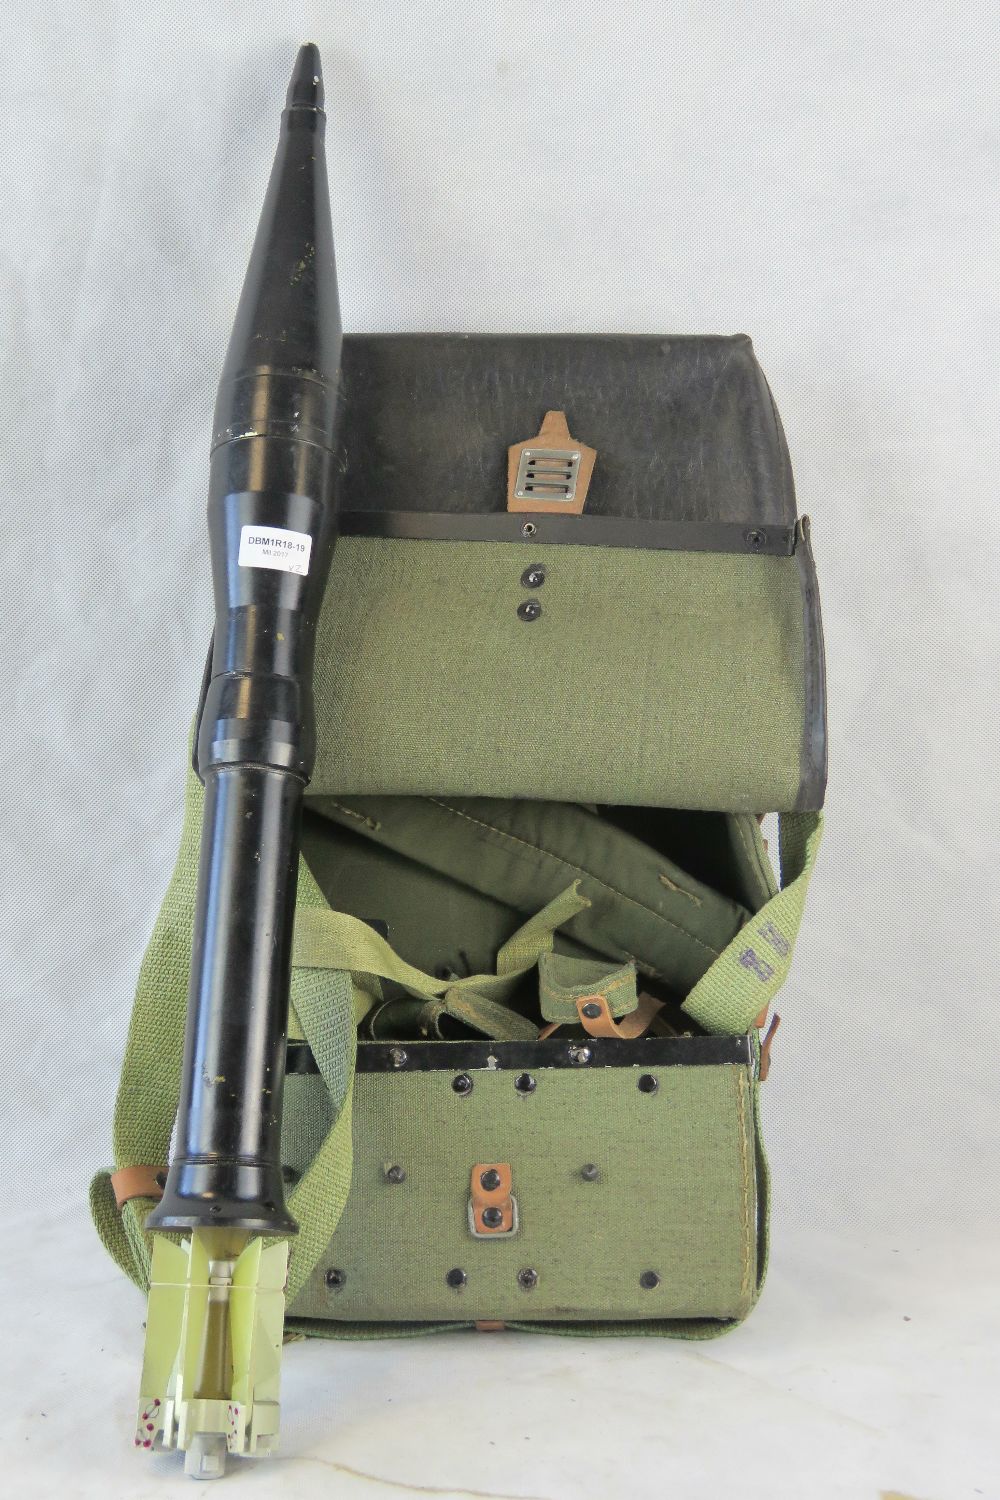 An inert Soviet RPG rocket and carry bag (two items).